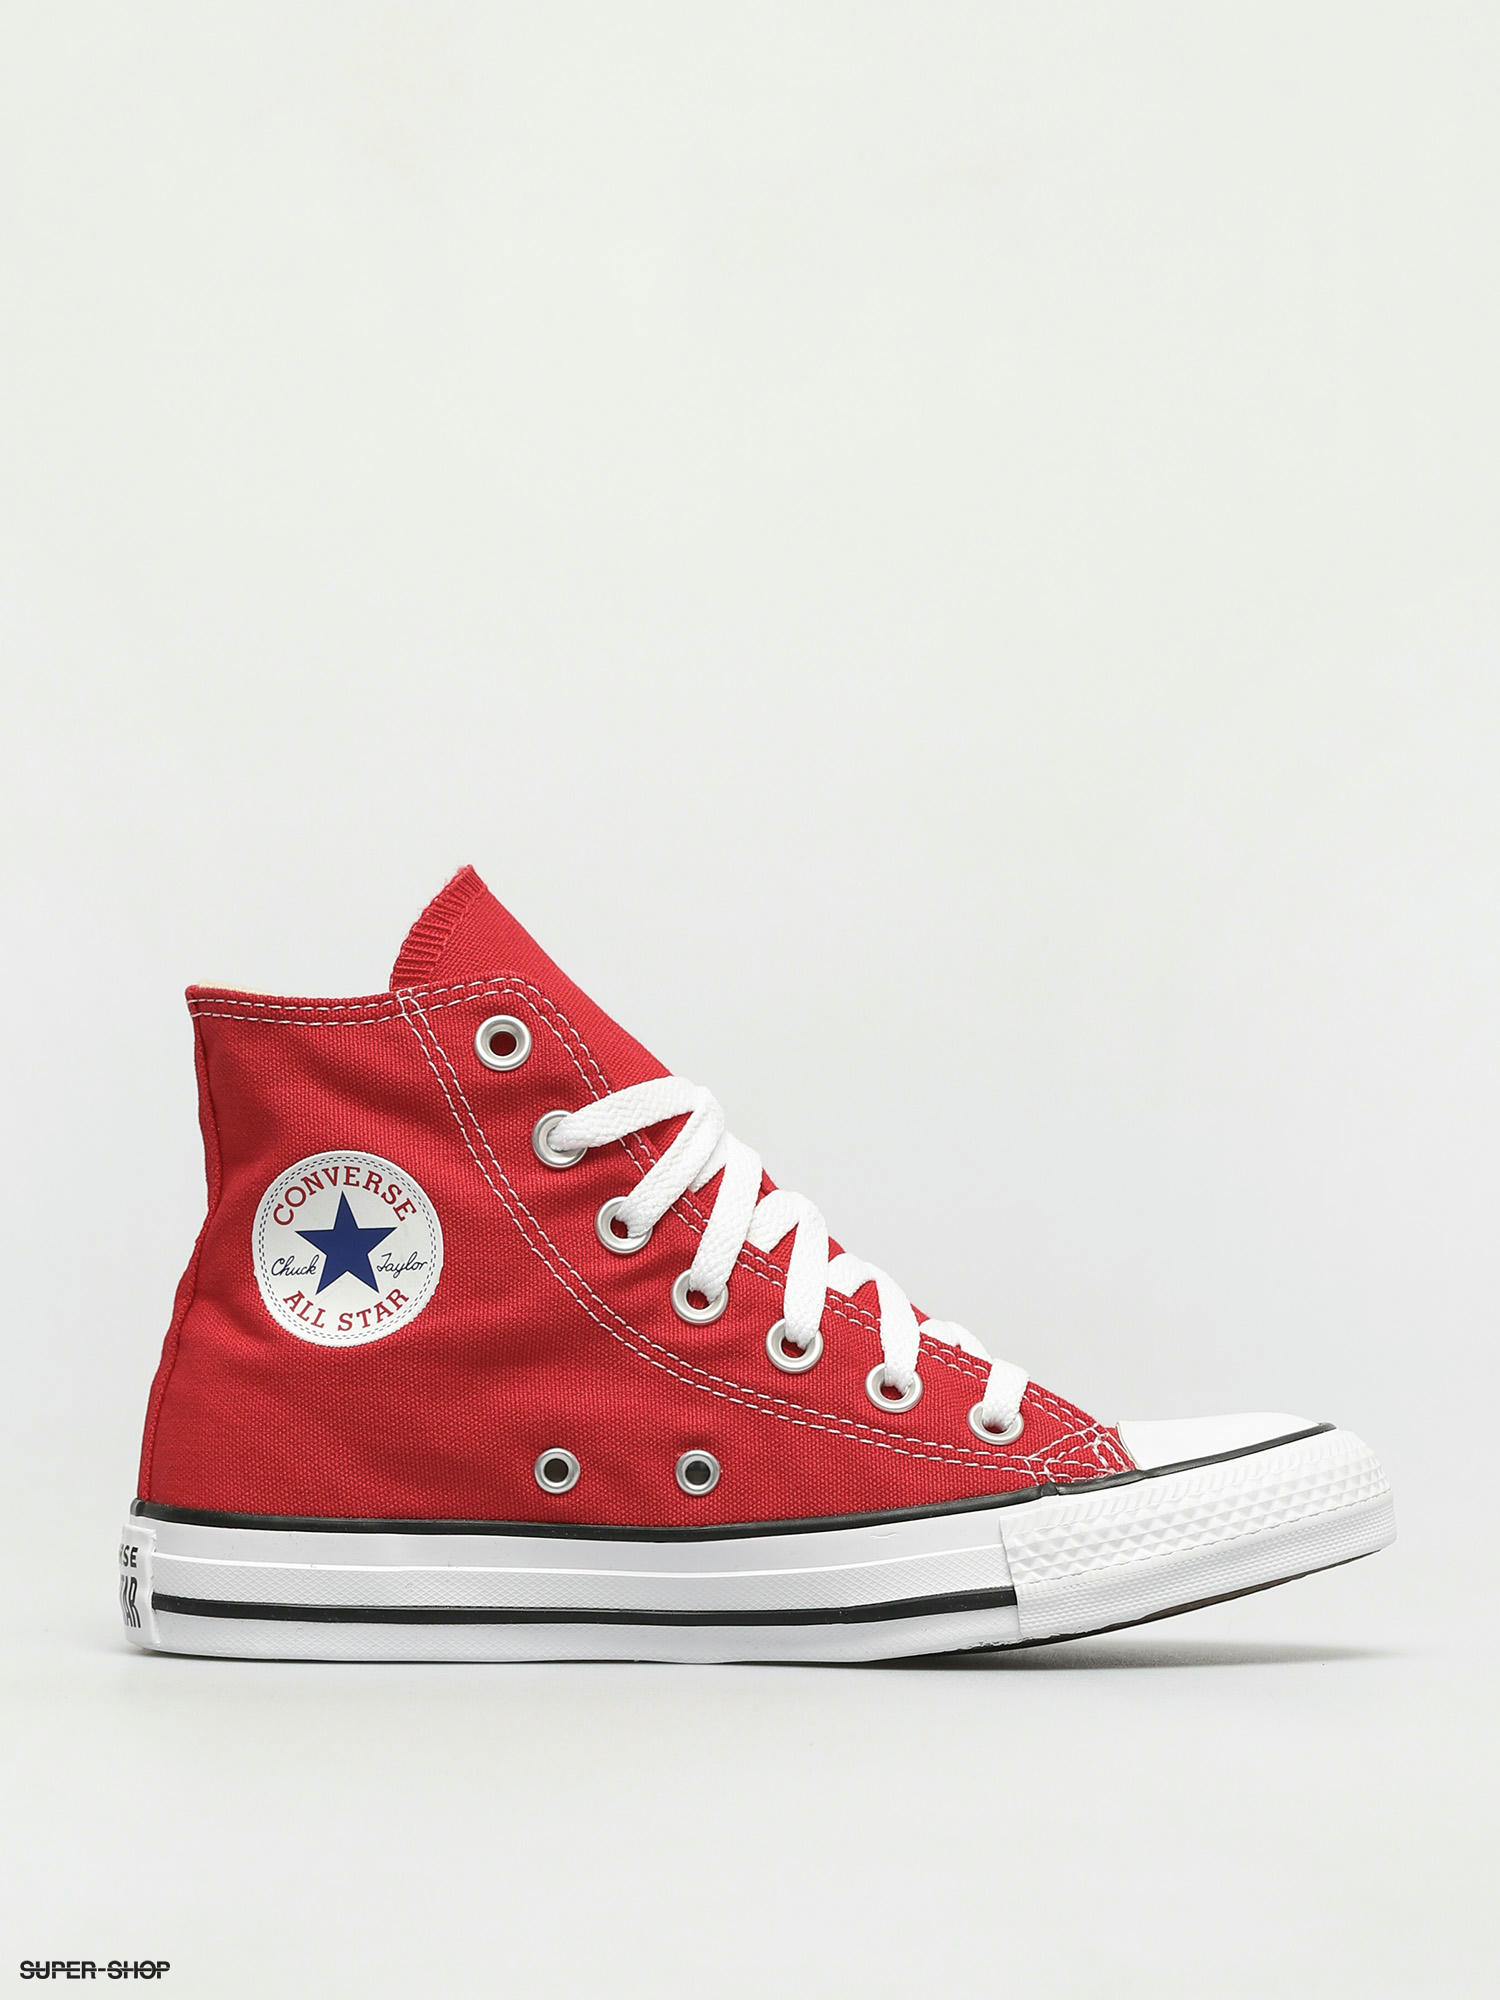 converse all star red and white